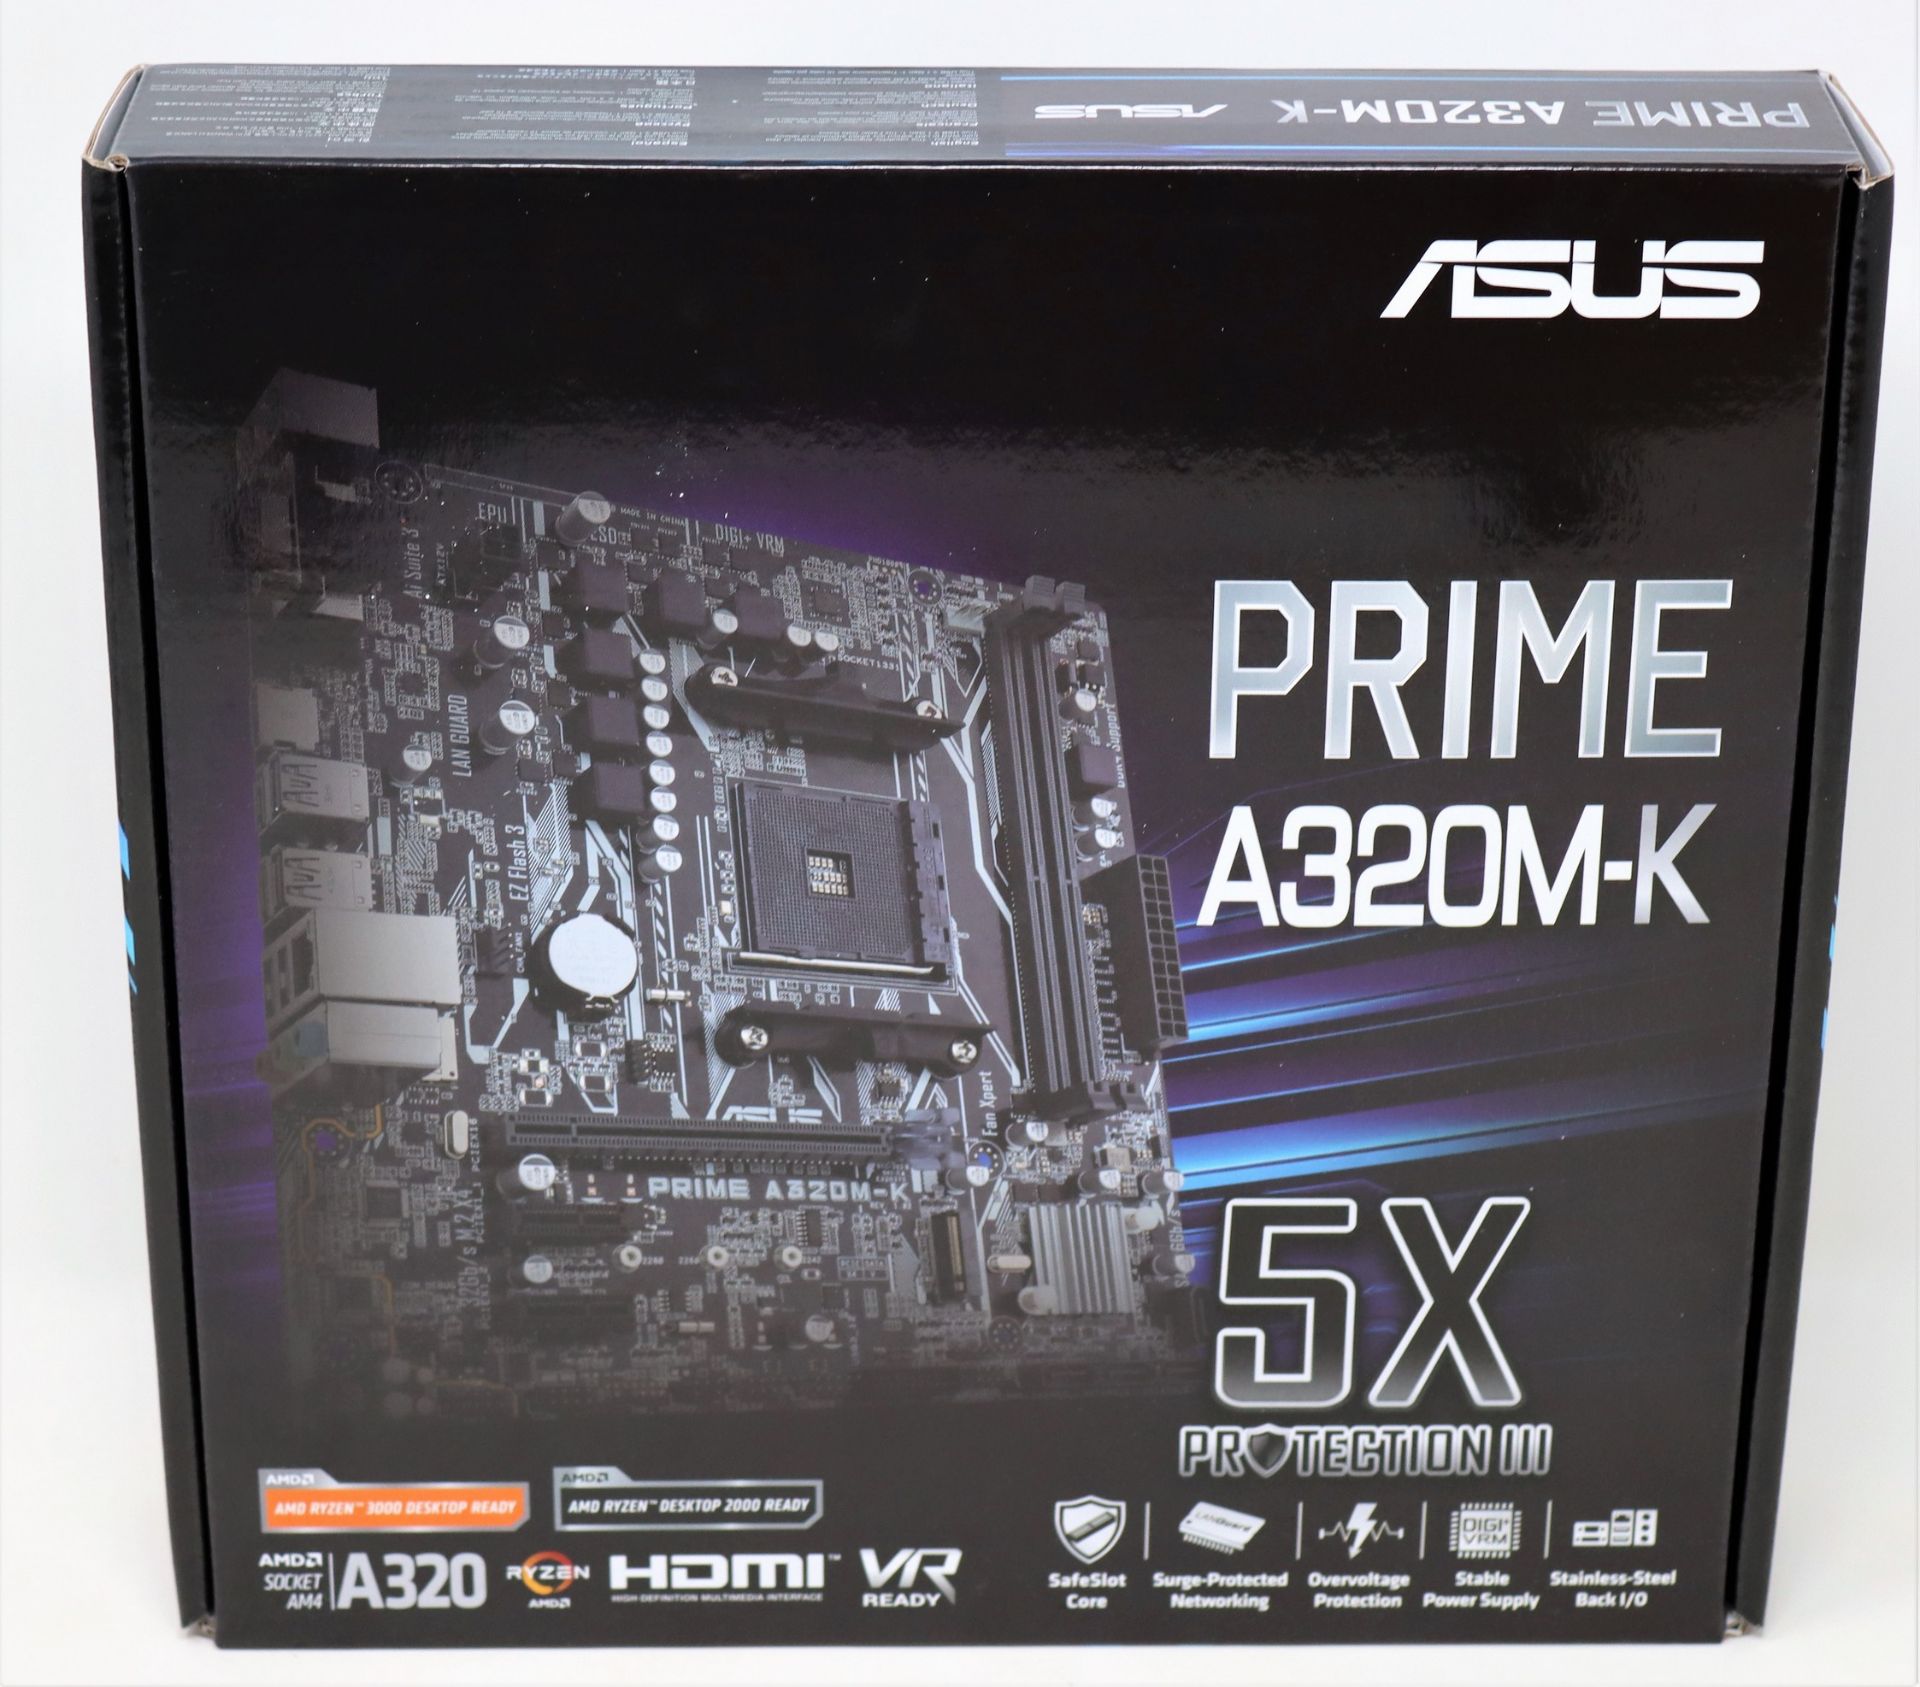 A boxed as new Asus Prime A320M-K AMD AM4 Motherboad (P/N: 90MB0TV0-M0EAY0).